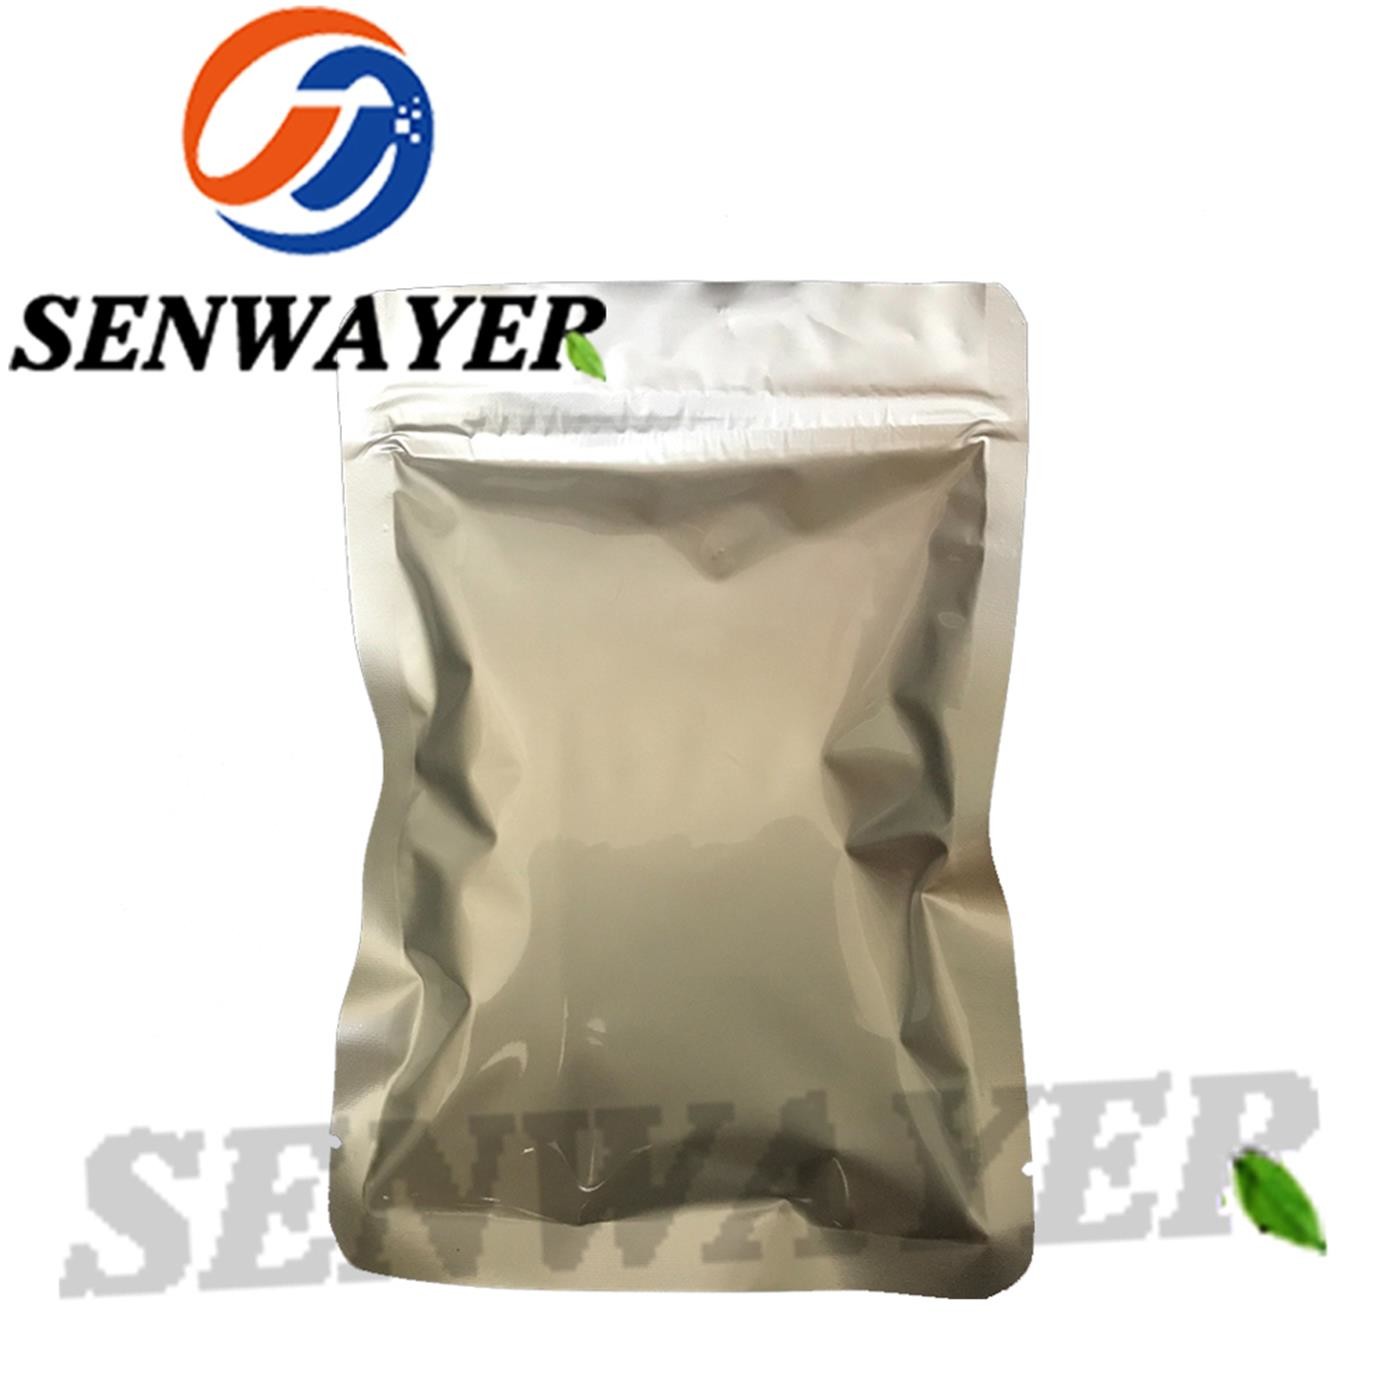 Wholesale Prostaglandin E2 Powder CAS 363-24-6 99% Raw Material from china suppliers